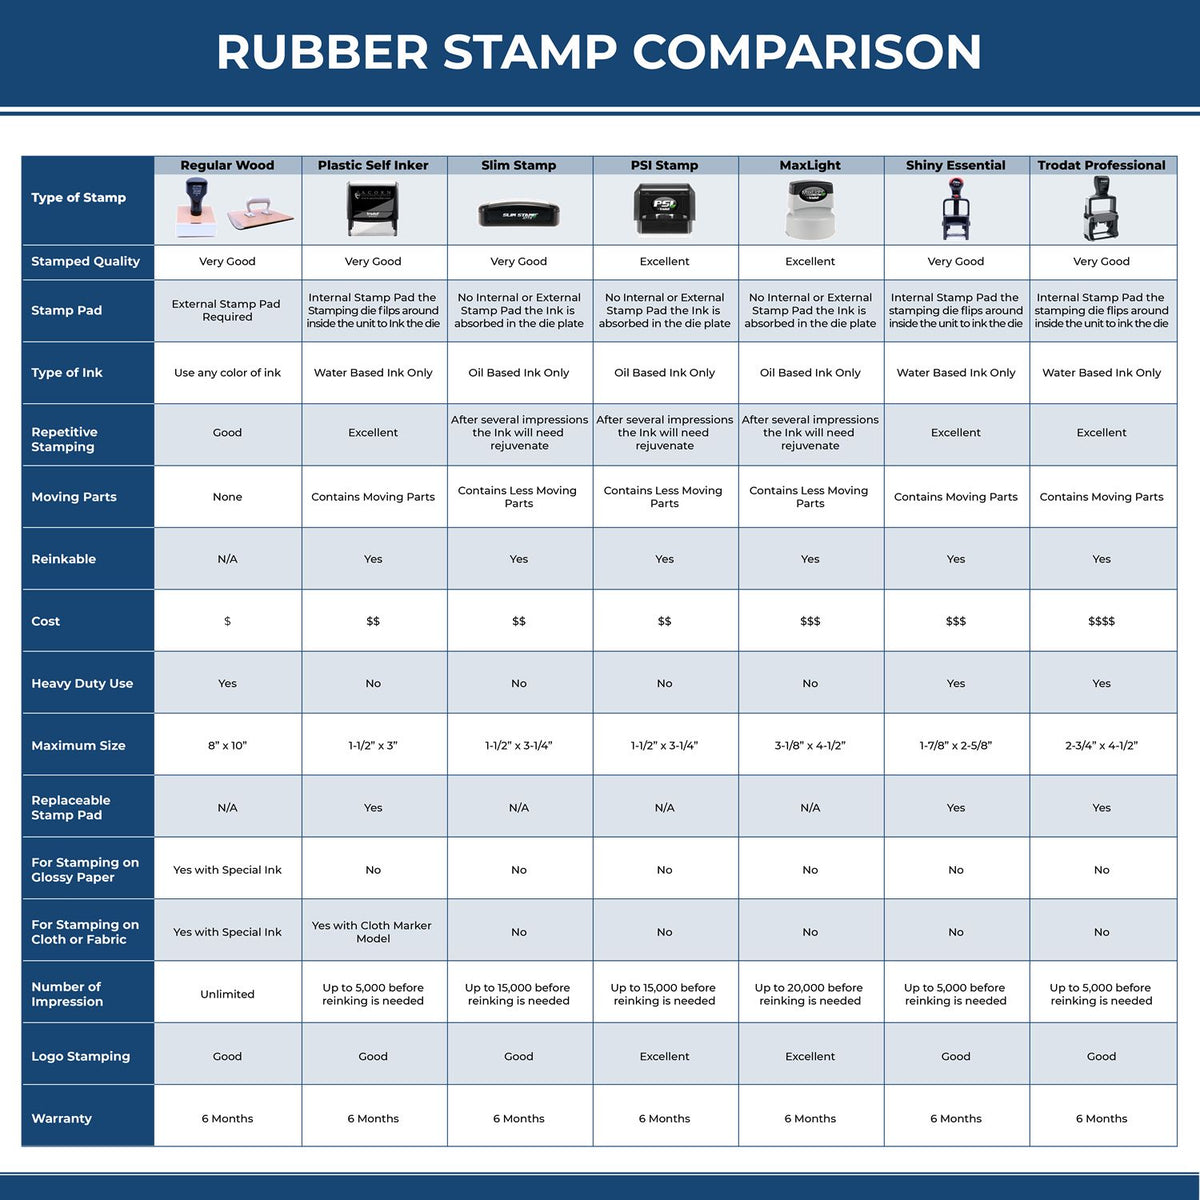 Large Second Notice Rubber Stamp 4155R Rubber Stamp Comparison